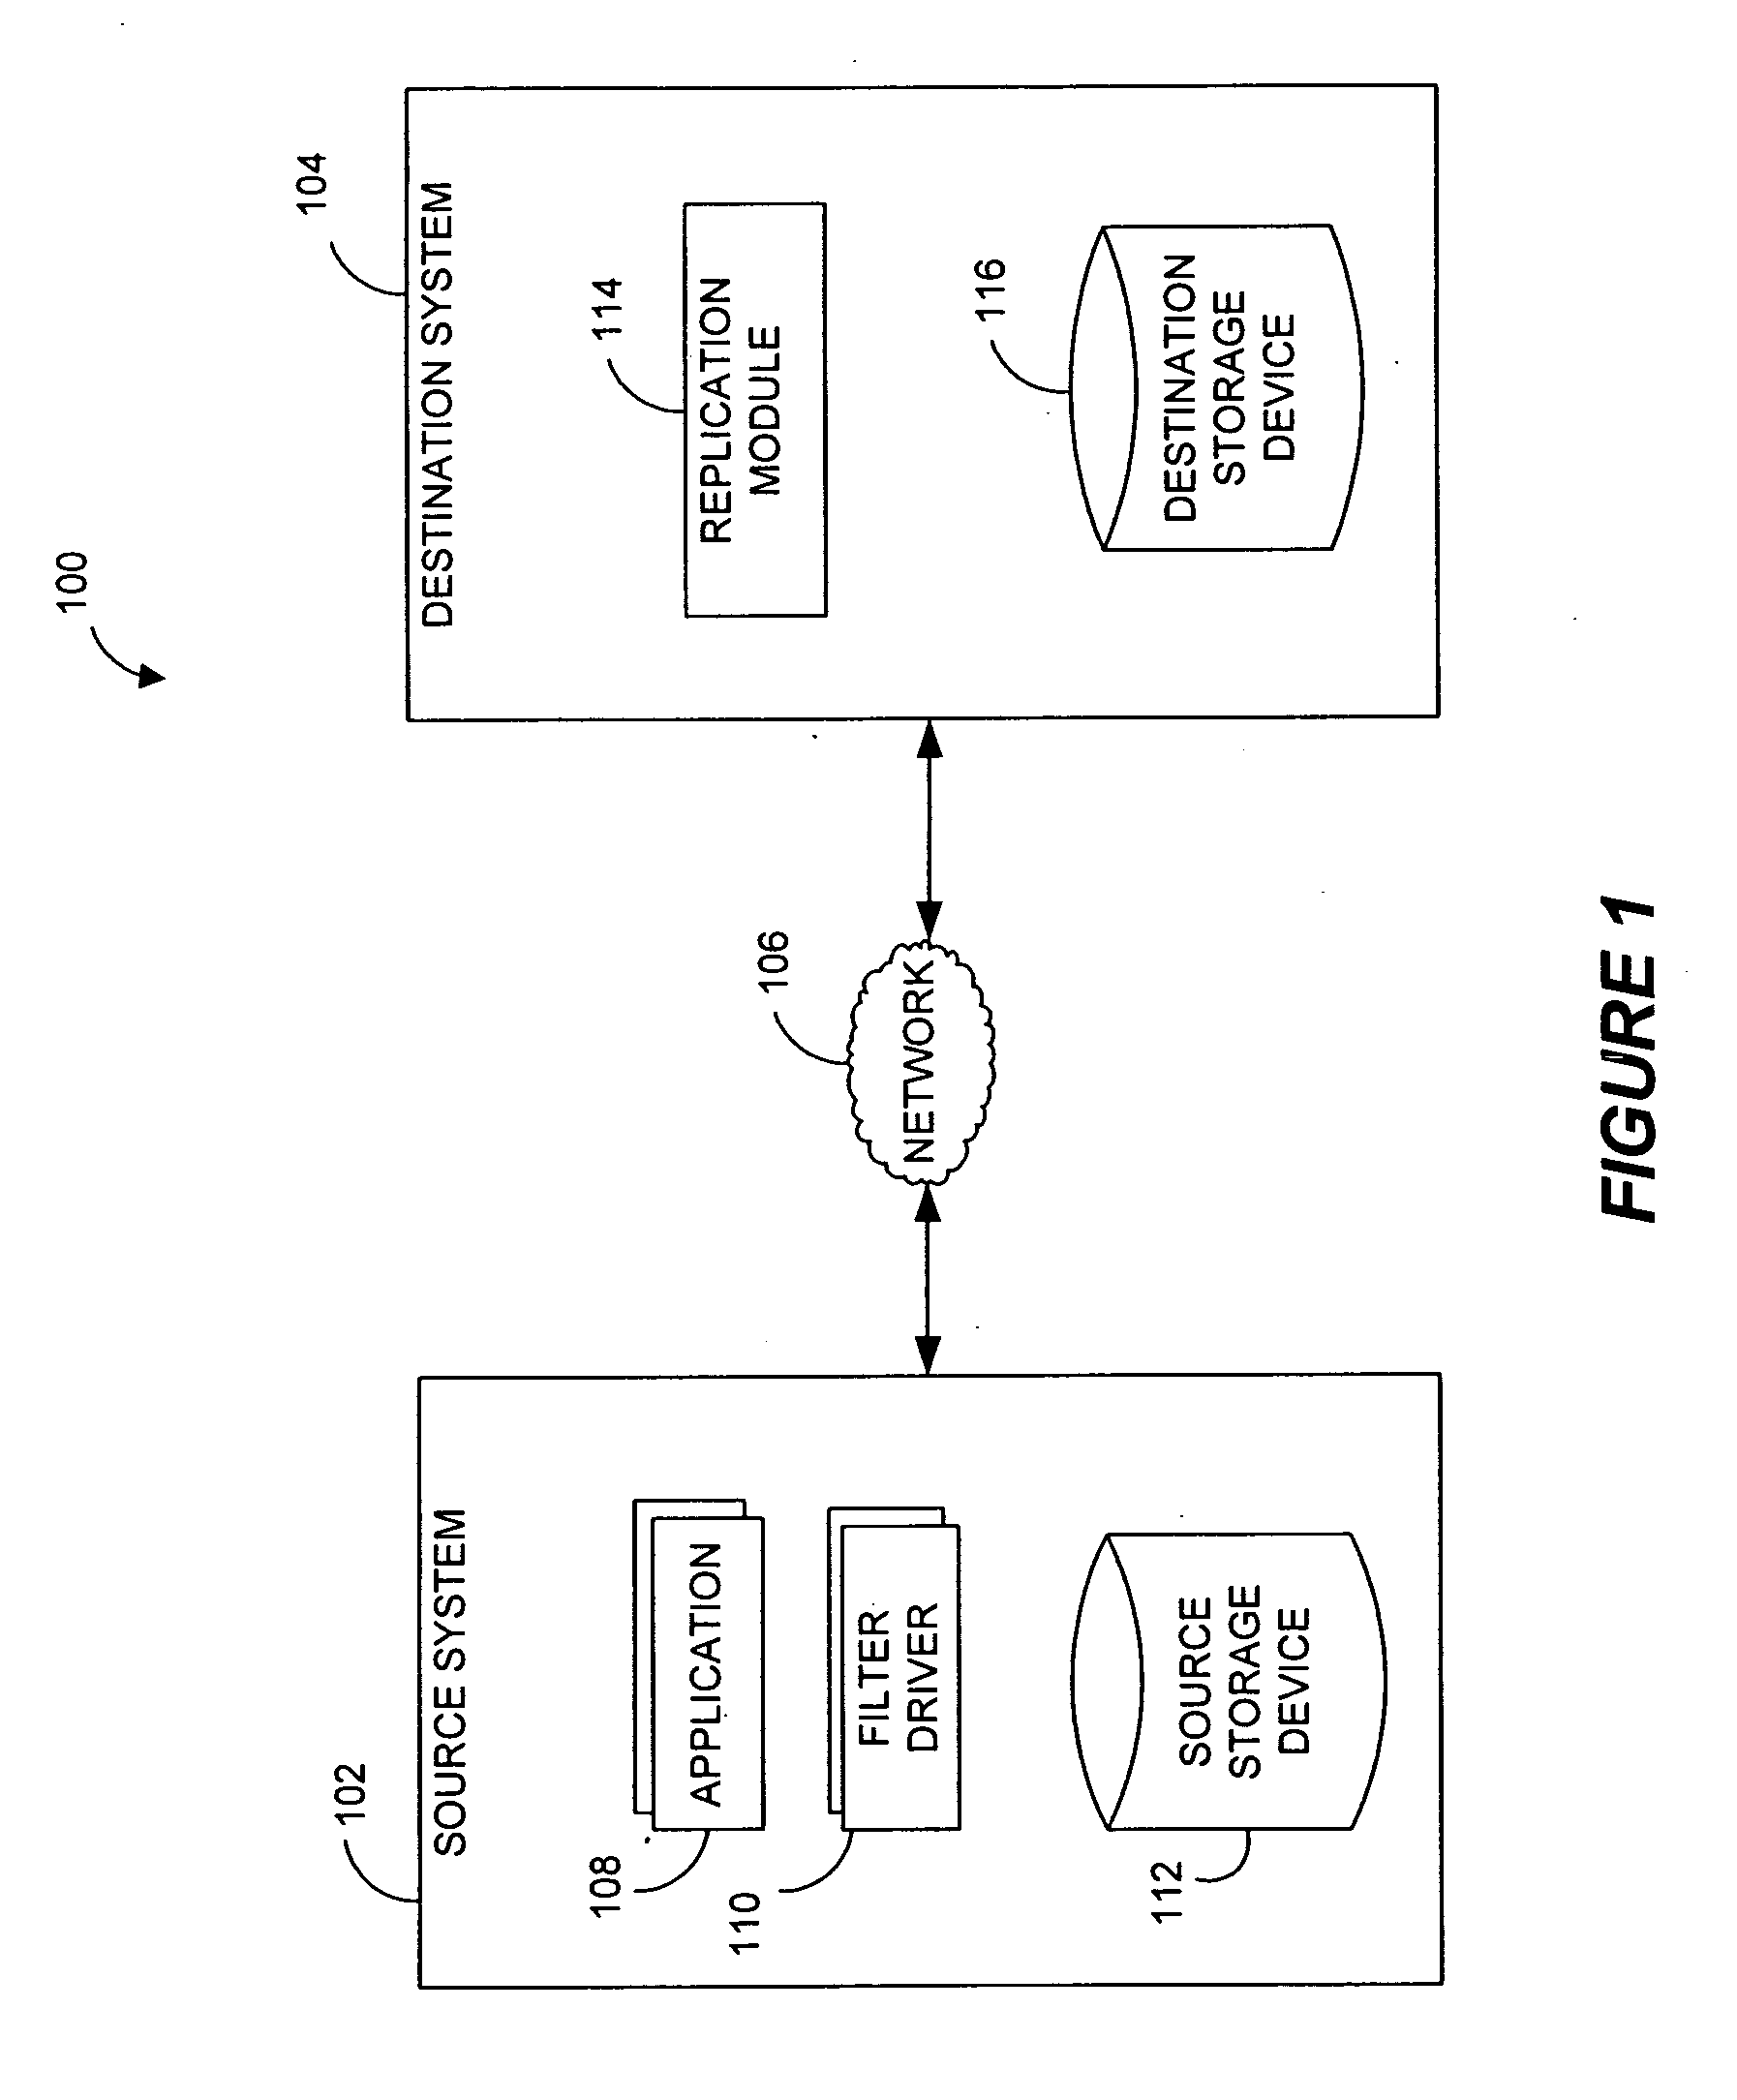 Destination systems and methods for performing data replication